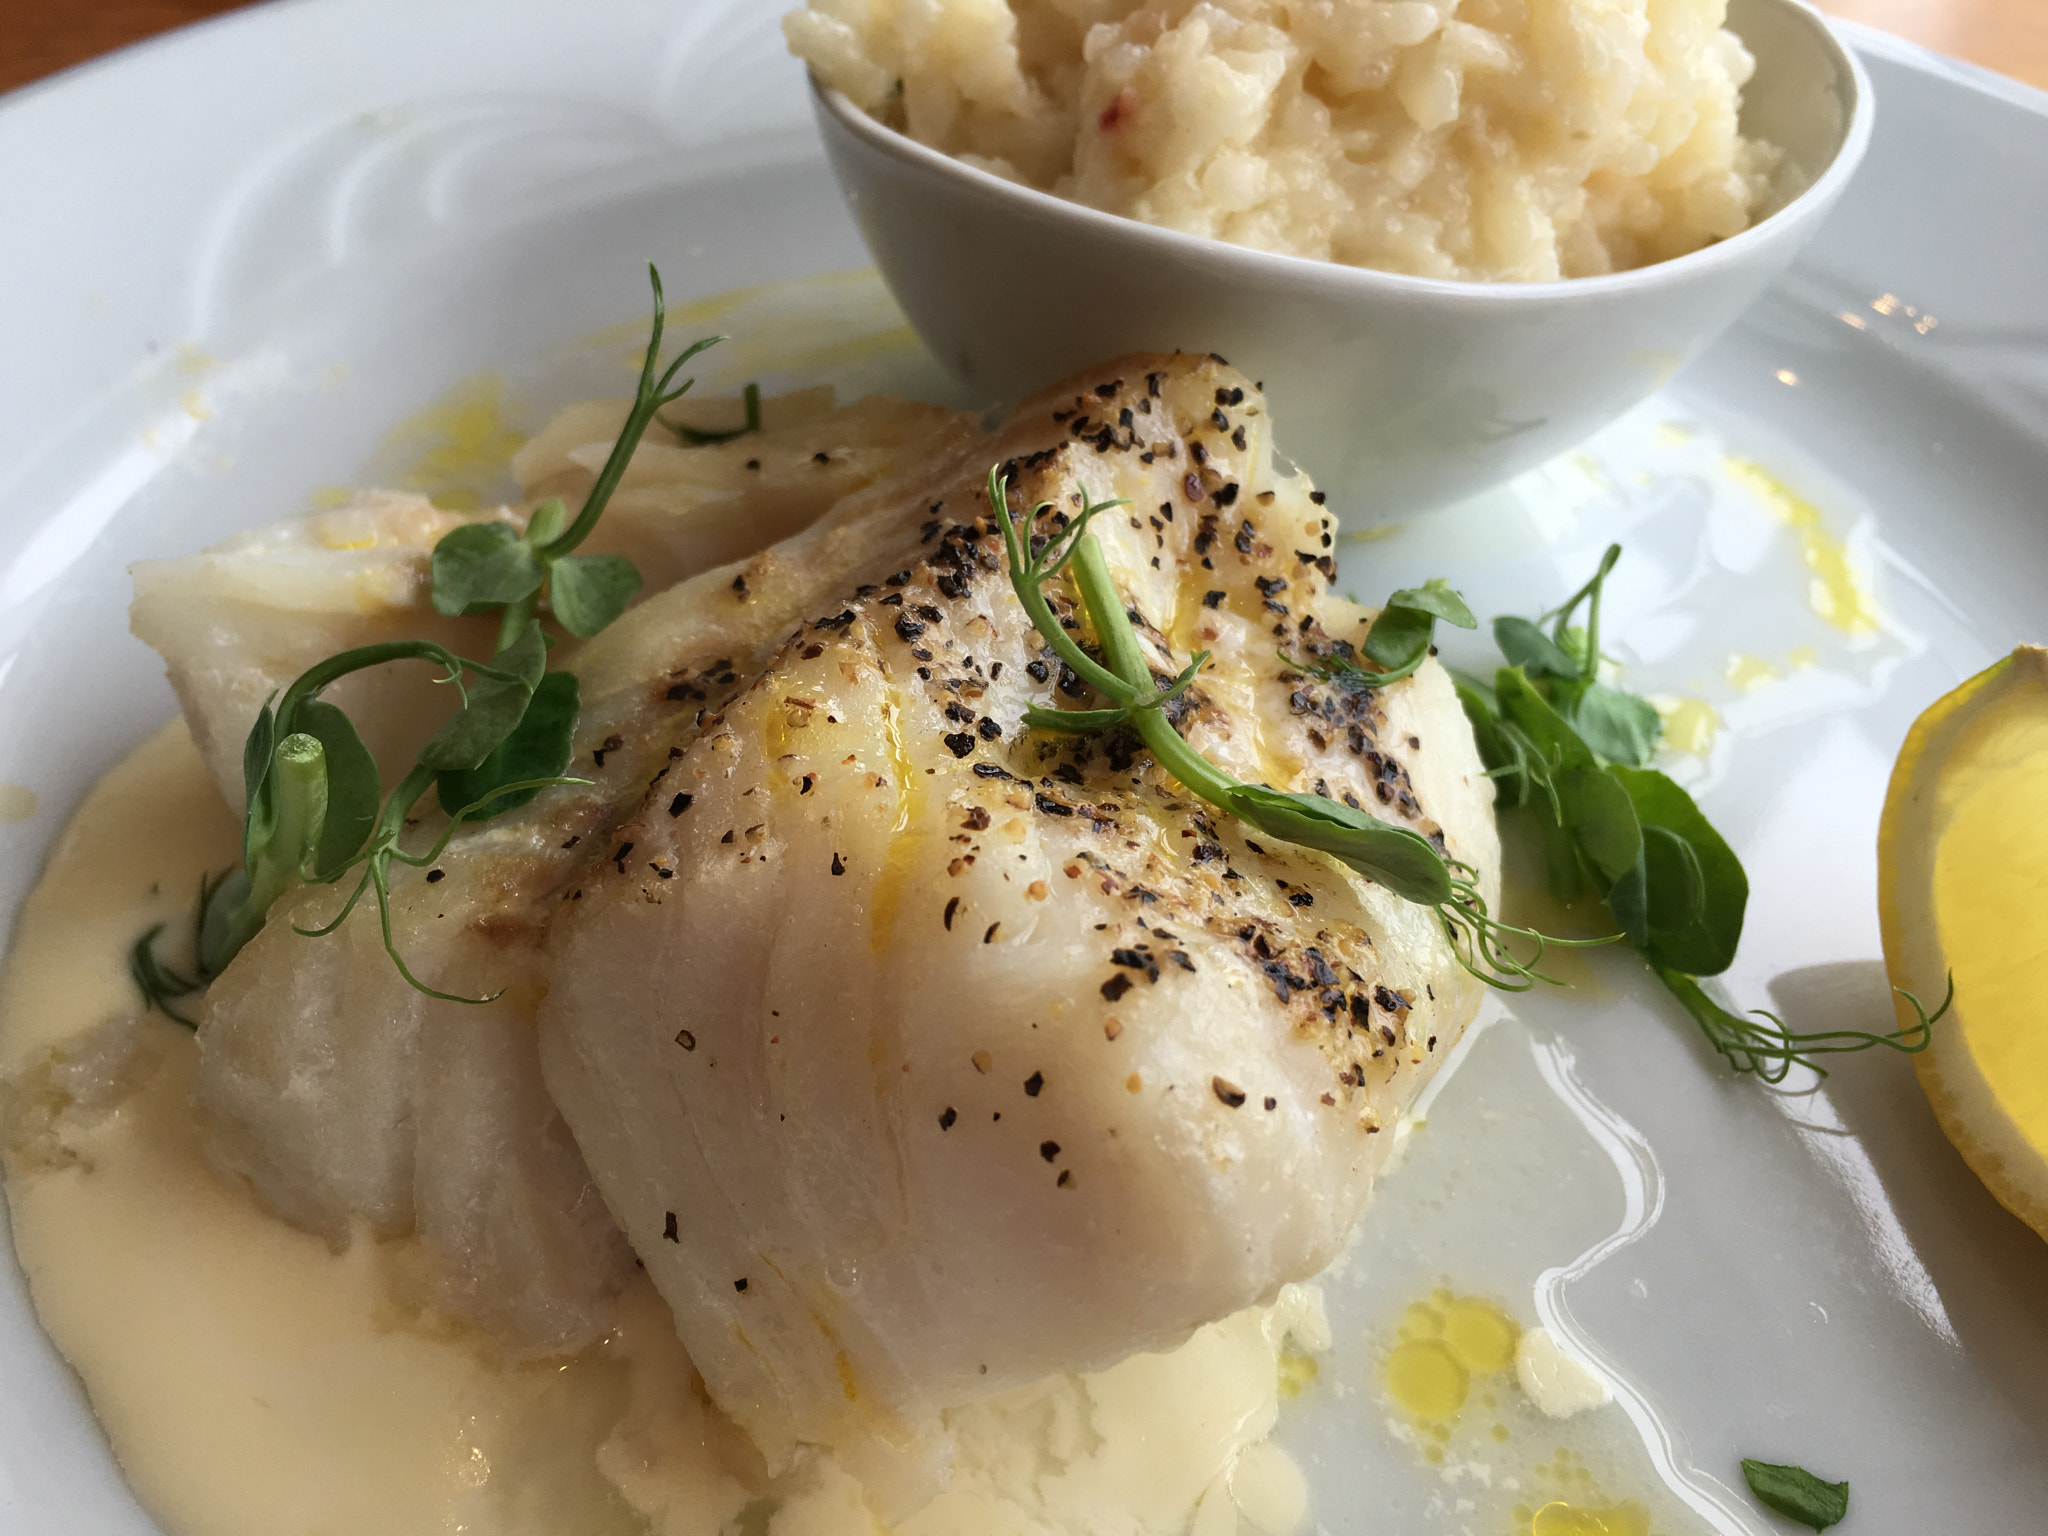 Halibut with risotto-I like how the light plays on the oil and the bright white dishes.